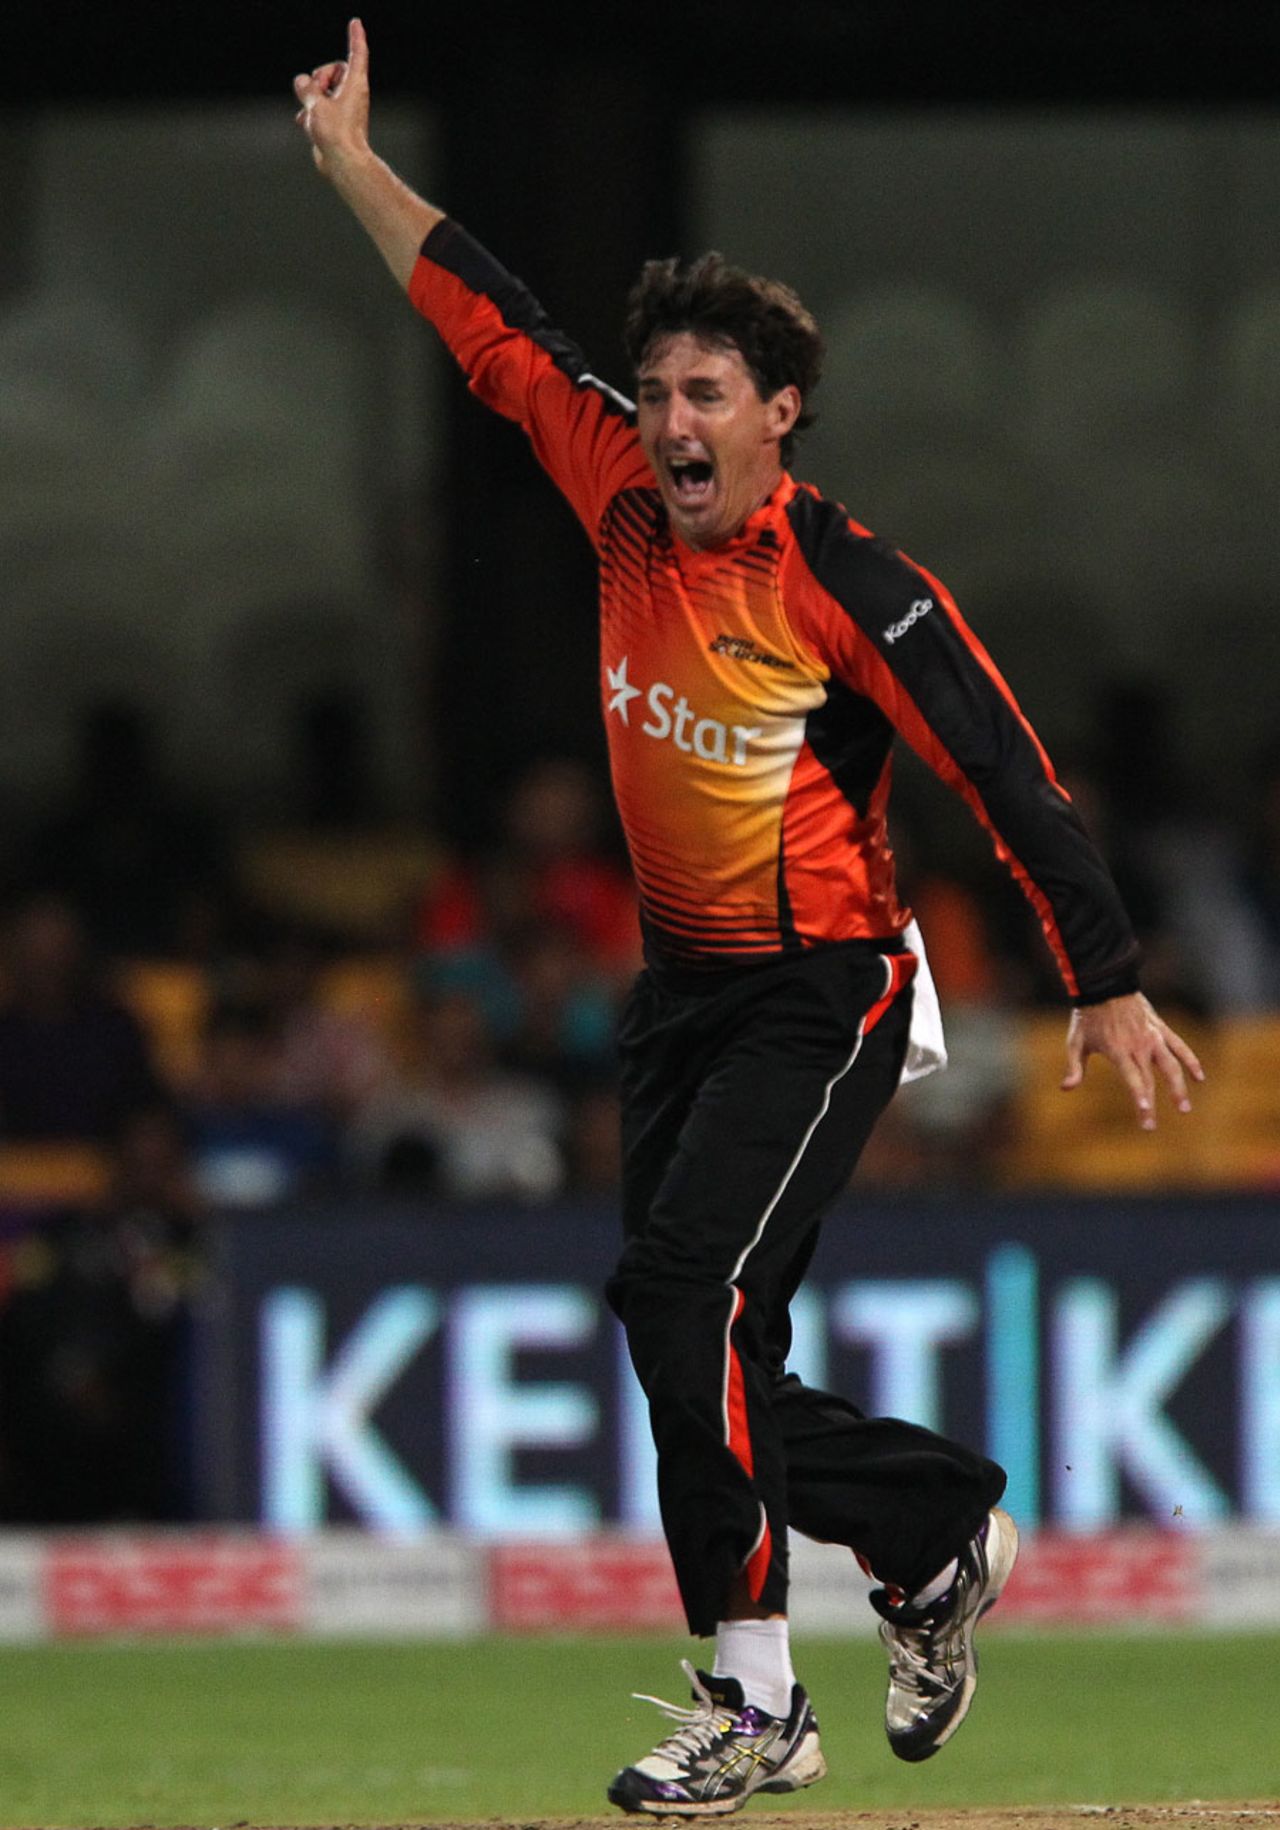 Brad Hogg is excited after removing Mithun Minhas, Chennai Super Kings v Perth Scorchers, Champions League T20, Bangalore, September 27, 2014